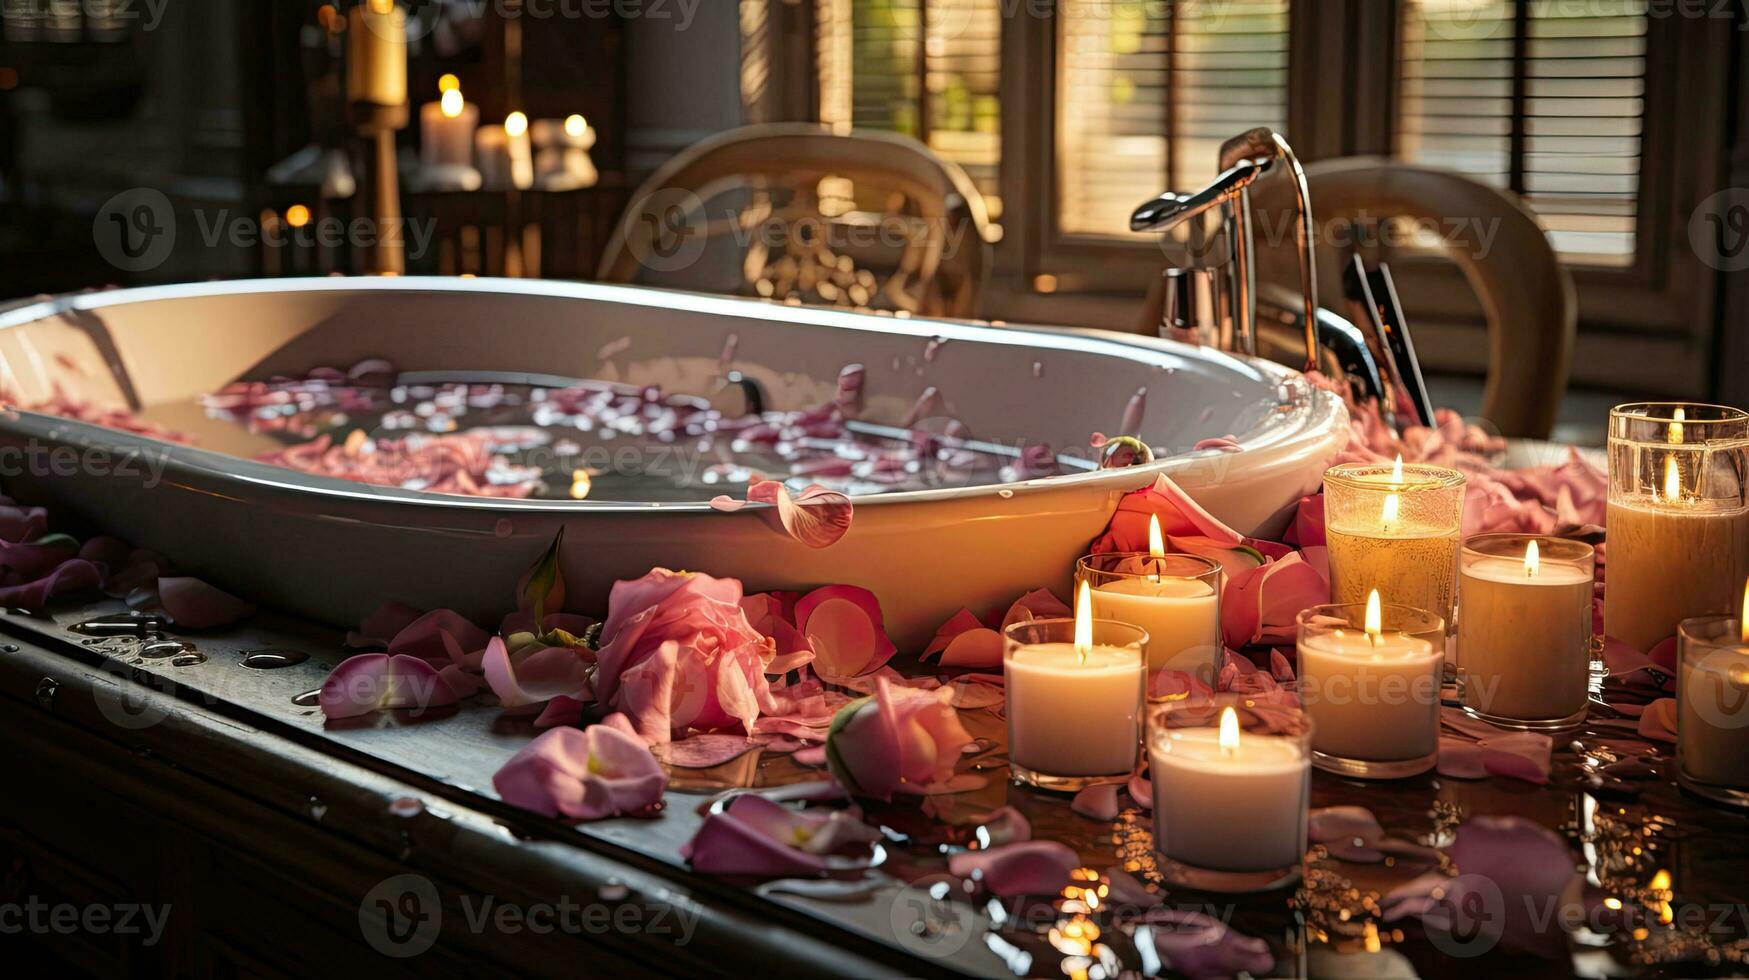 Warm romantic relaxing bath with rose petals and burning candles 33047177  Stock Photo at Vecteezy